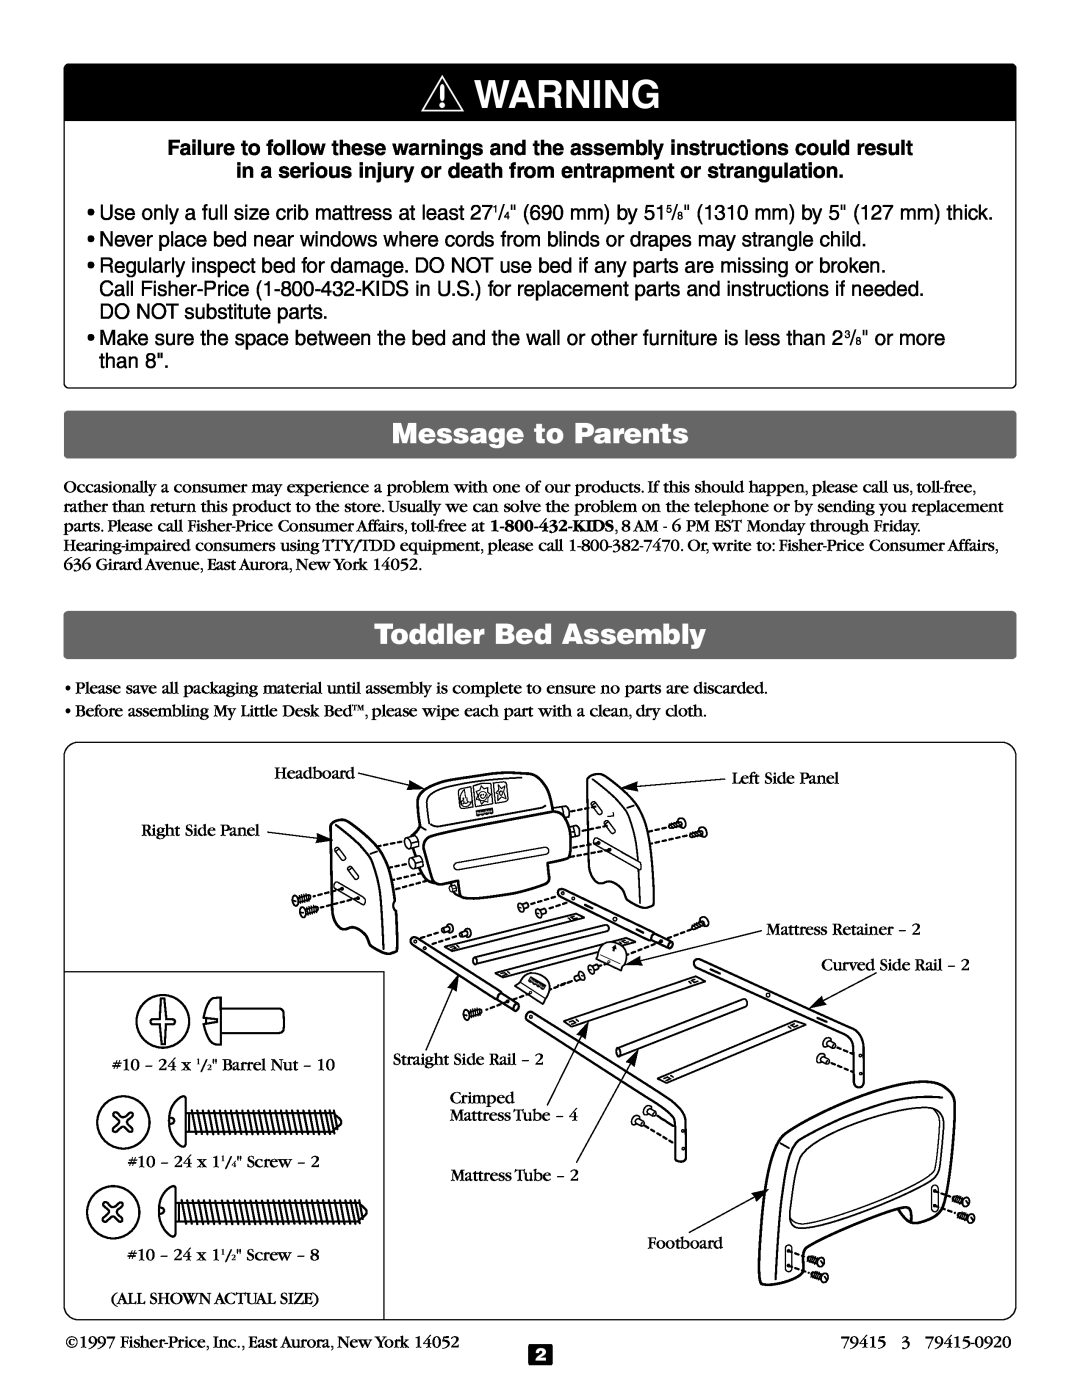 Fisher-Price 79415 Message to Parents, Toddler Bed Assembly, in a serious injury or death from entrapment or strangulation 